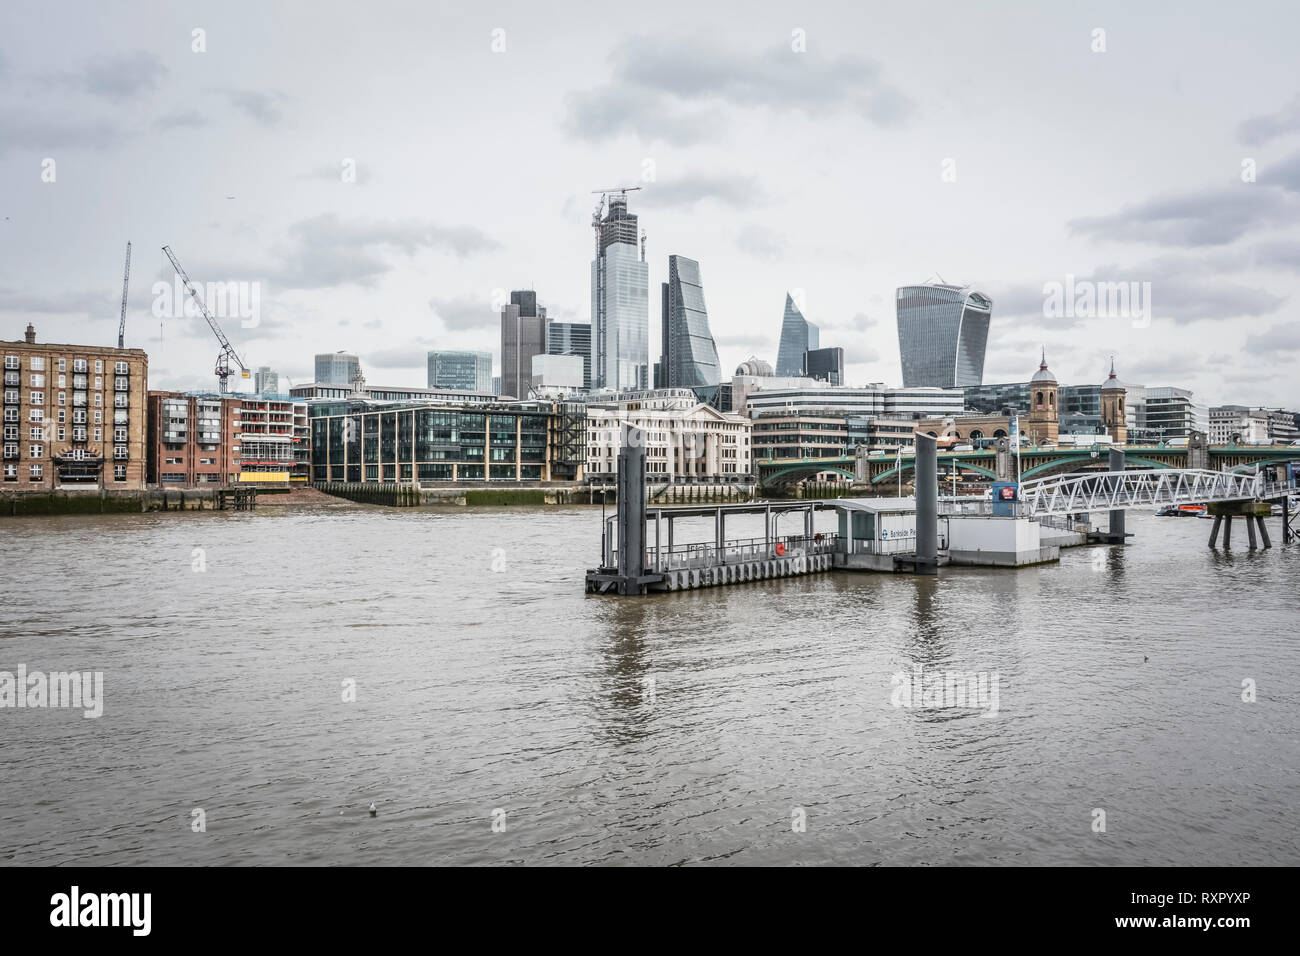 High-rise office development and skyline in the City of London, UK Stock Photo